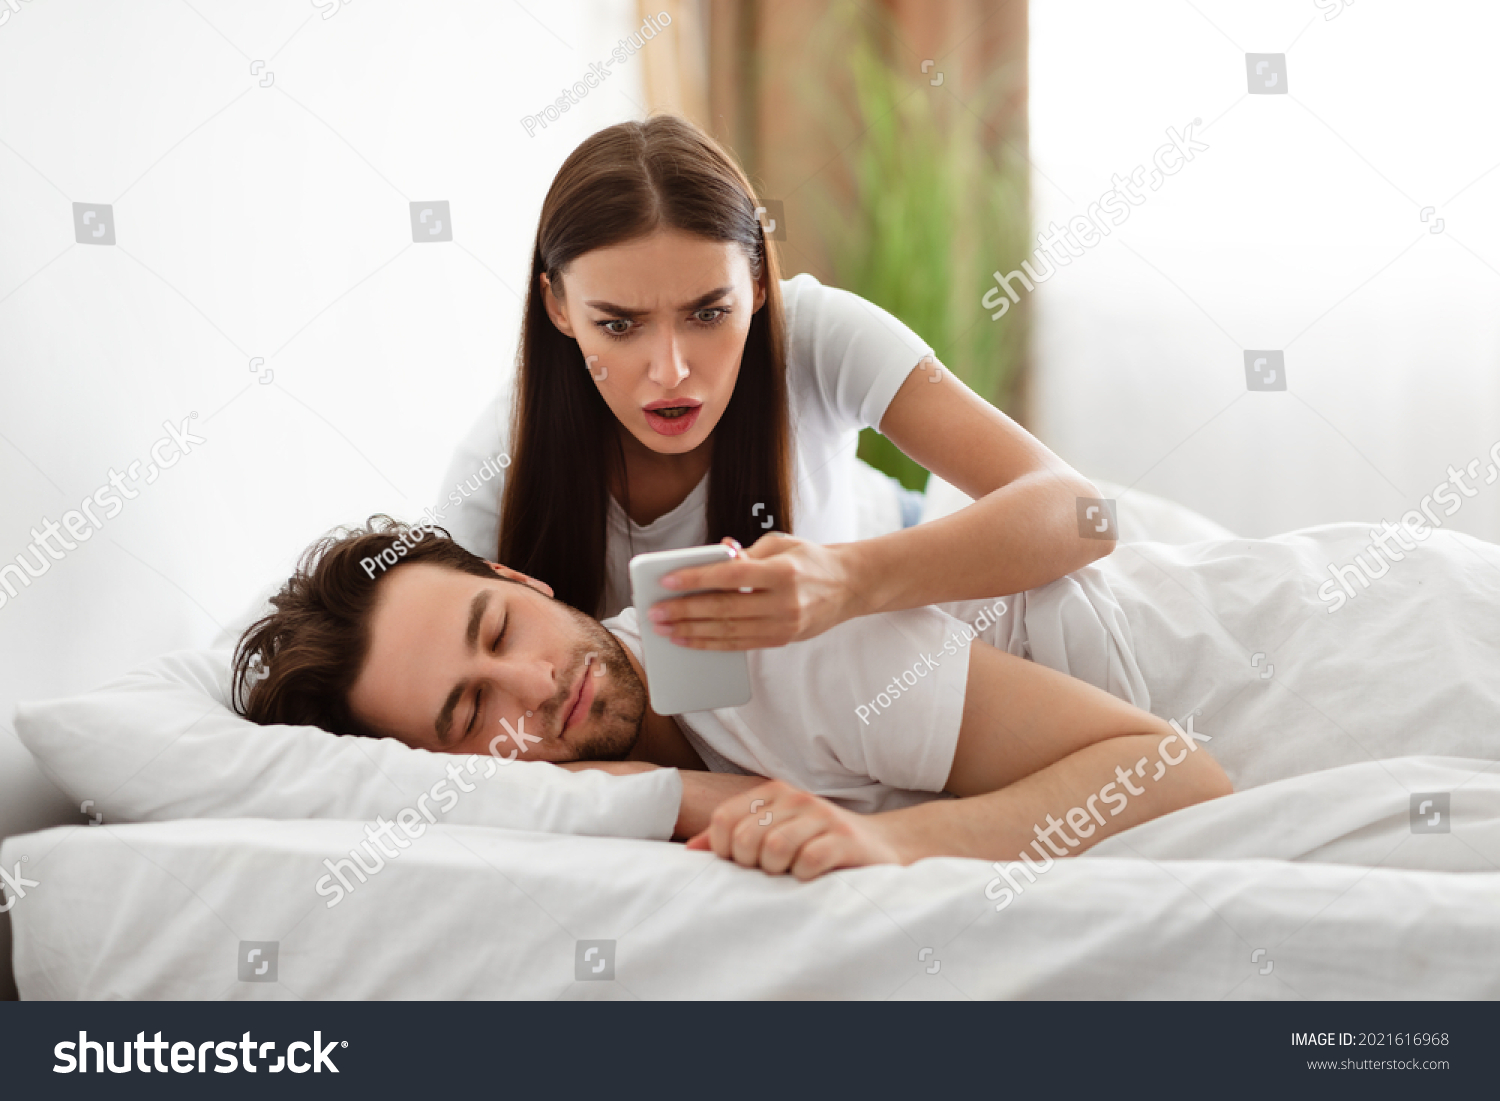 Infidelity. Shocked Wife Reading Message From Lover On Phone While Cheating Husband Sleeping In Bedroom At Home. Jealous Woman Checking Boyfriend's Cellphone Chats. Affair, Relationship Issues #2021616968